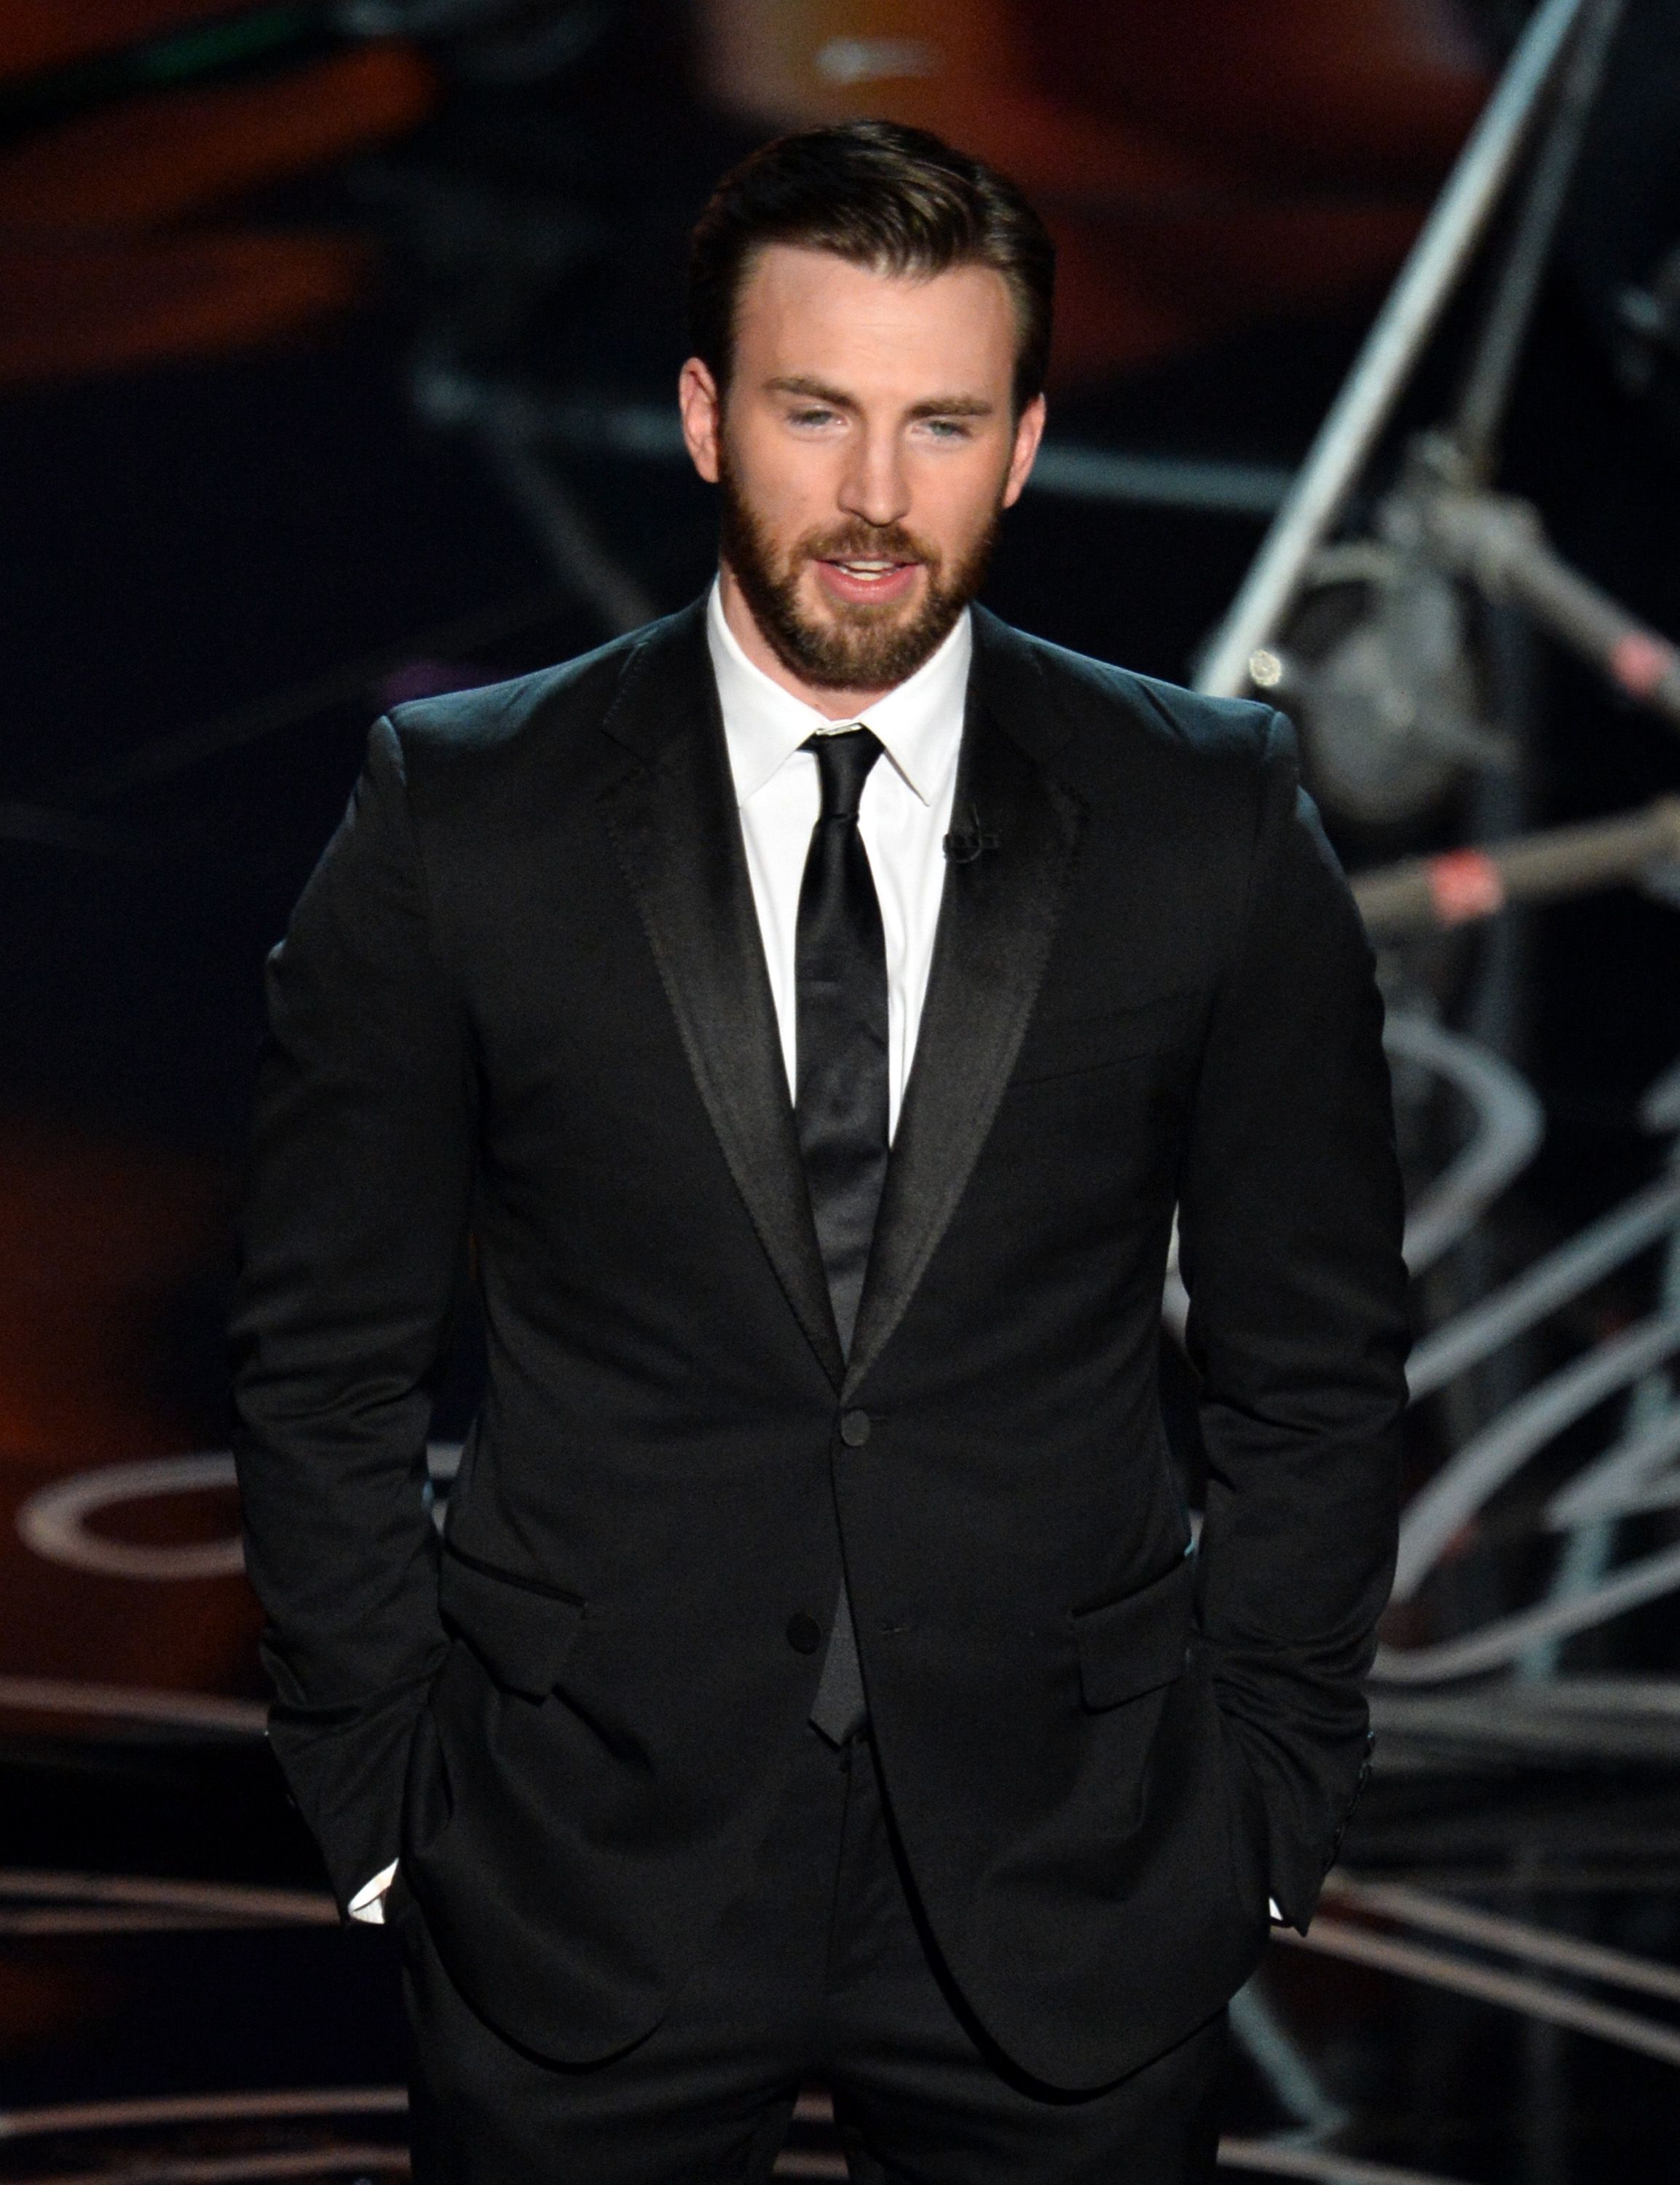 Chris Evans suit look Step up your monotone game with Chris Evans